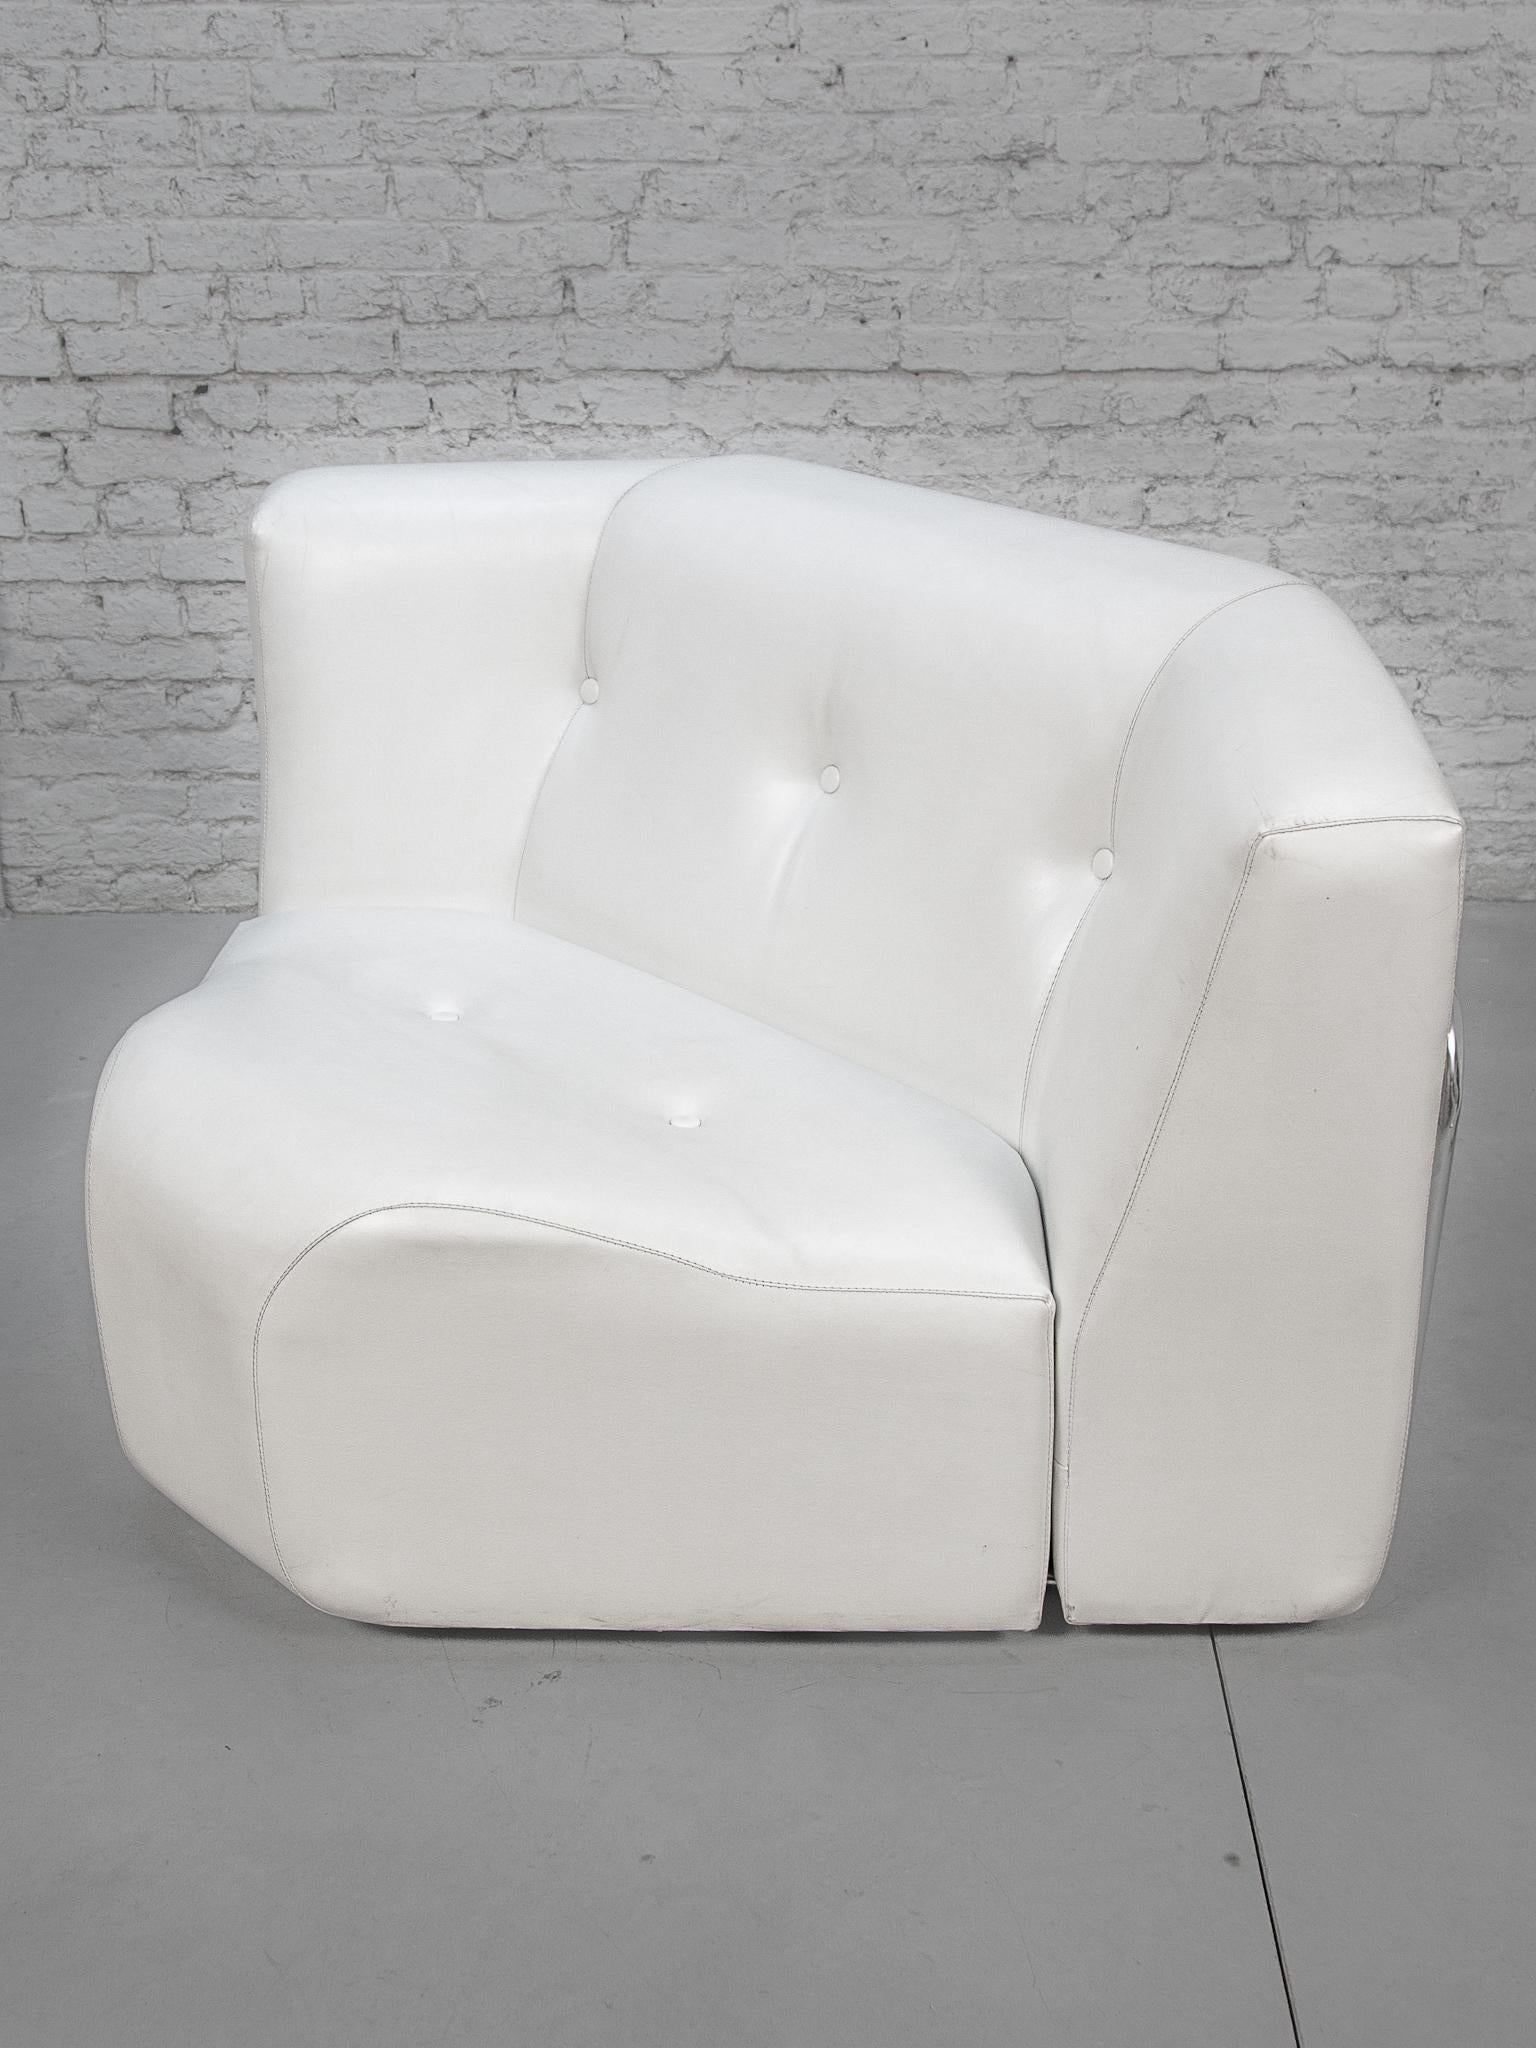 White and Chrome Livingroom set of Adriano Piazzesi Lounge Chairs and Footstools For Sale 3